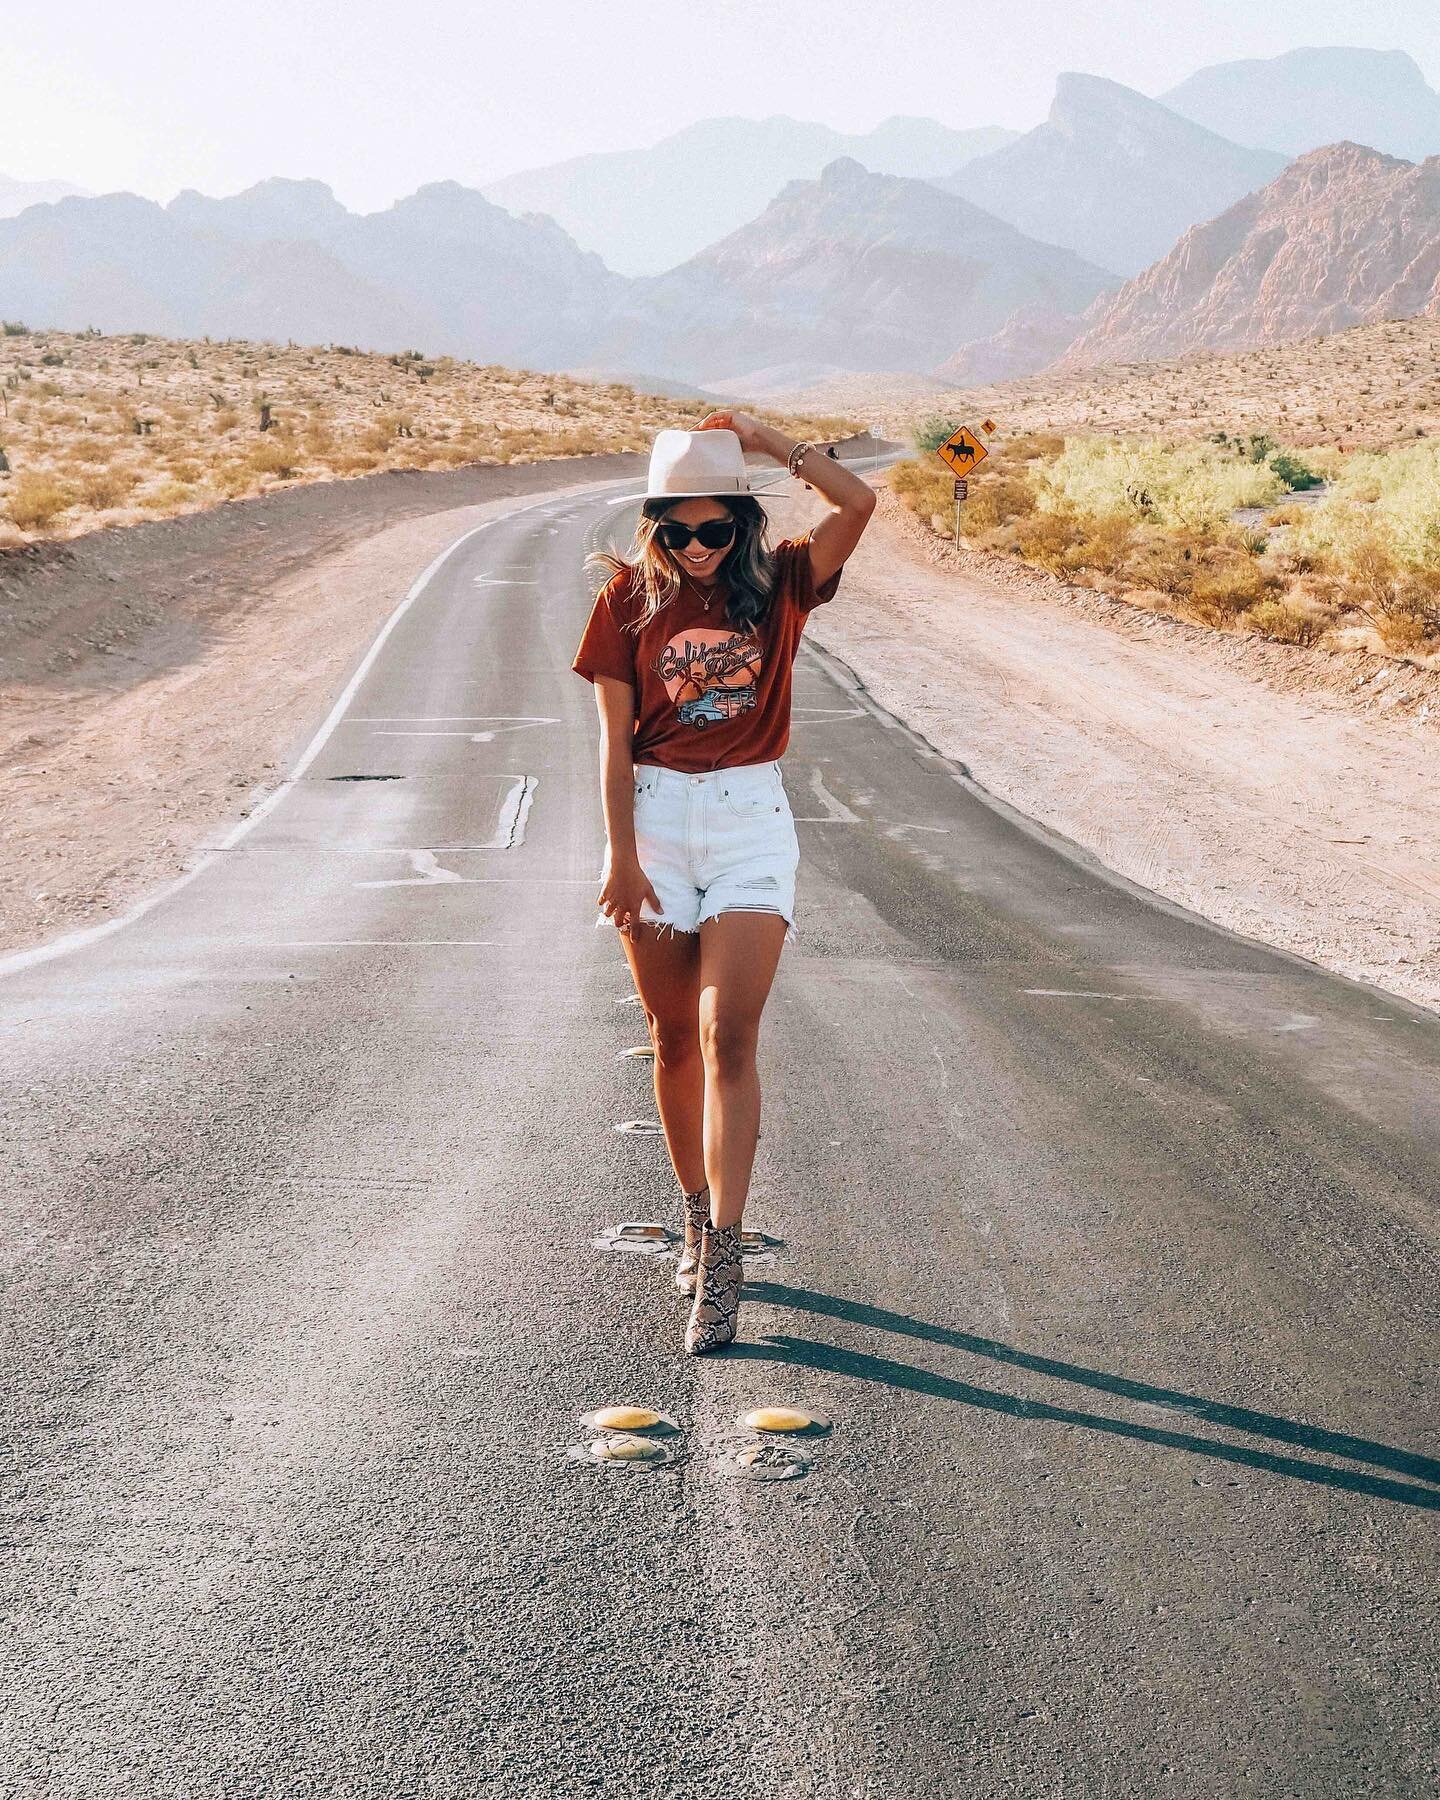 🤳🚘 🌍 Staying camera-ready while traveling is something I've picked up while exploring the world's most wondrous places. And as much as I want to say, &quot;I woke up like this,&quot; well, I did NOT. 😜

Go to @fashionshowlv&rsquo;s LIFESTYLE sect